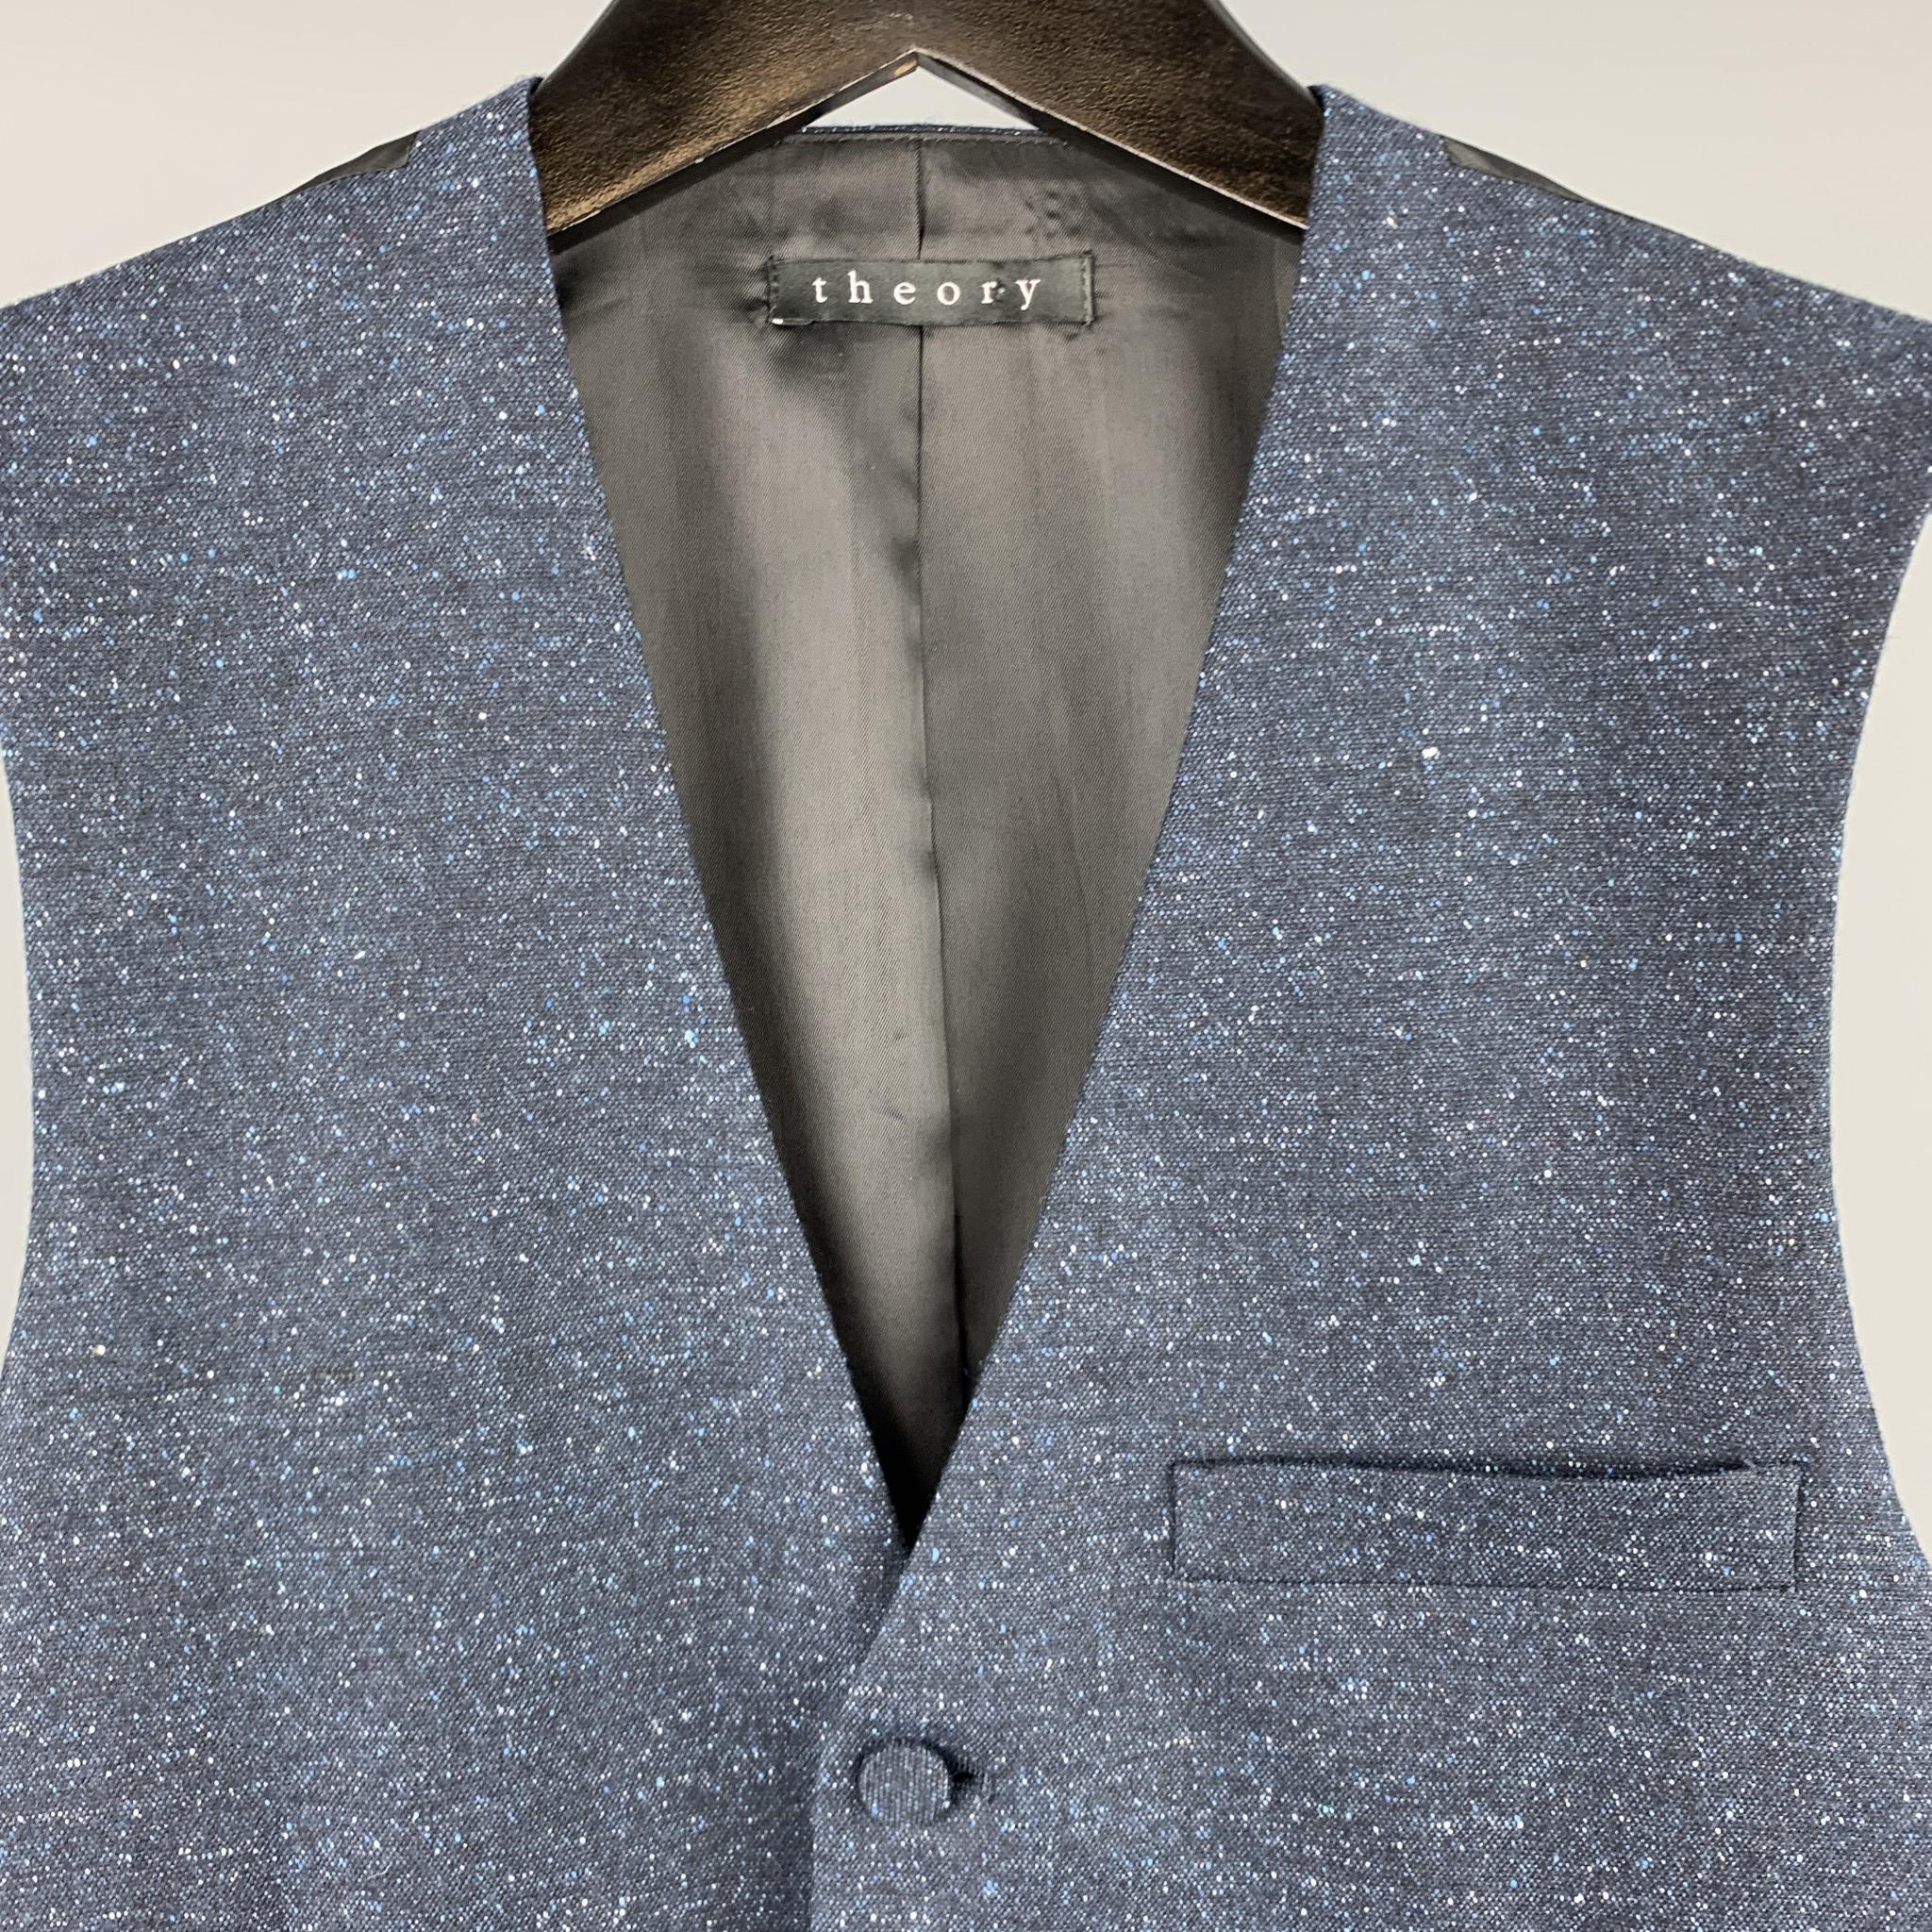 THEORY vest comes in heathered navy silk blend with a V neck. 

Excellent Pre-Owned Condition.
Marked: US 36

Measurements:

Shoulder: 13.5 in.
Chest: 33 in.
Length: 23.5 in.